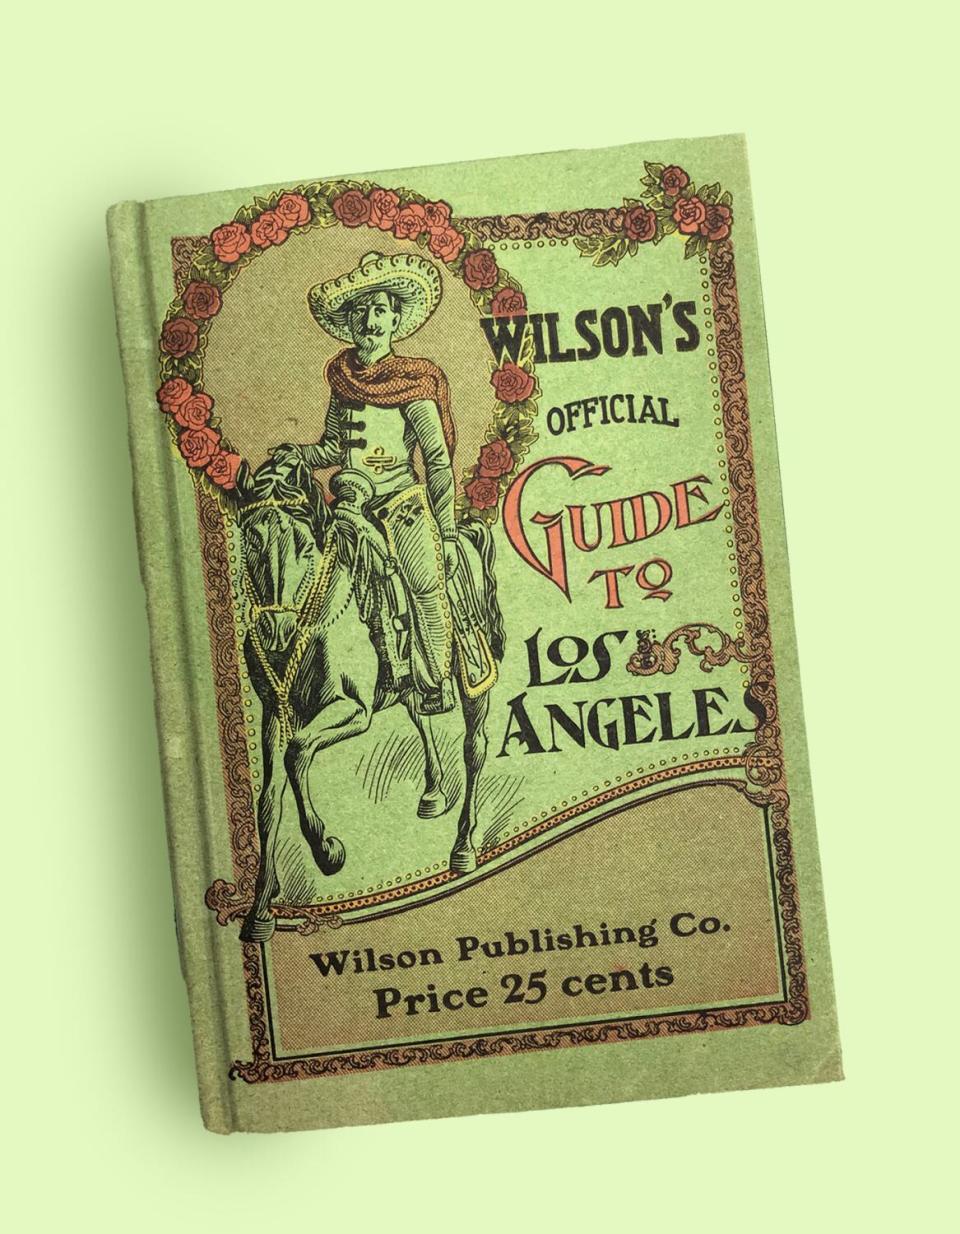 "Wilson's Official Guide to Los Angeles," 1901